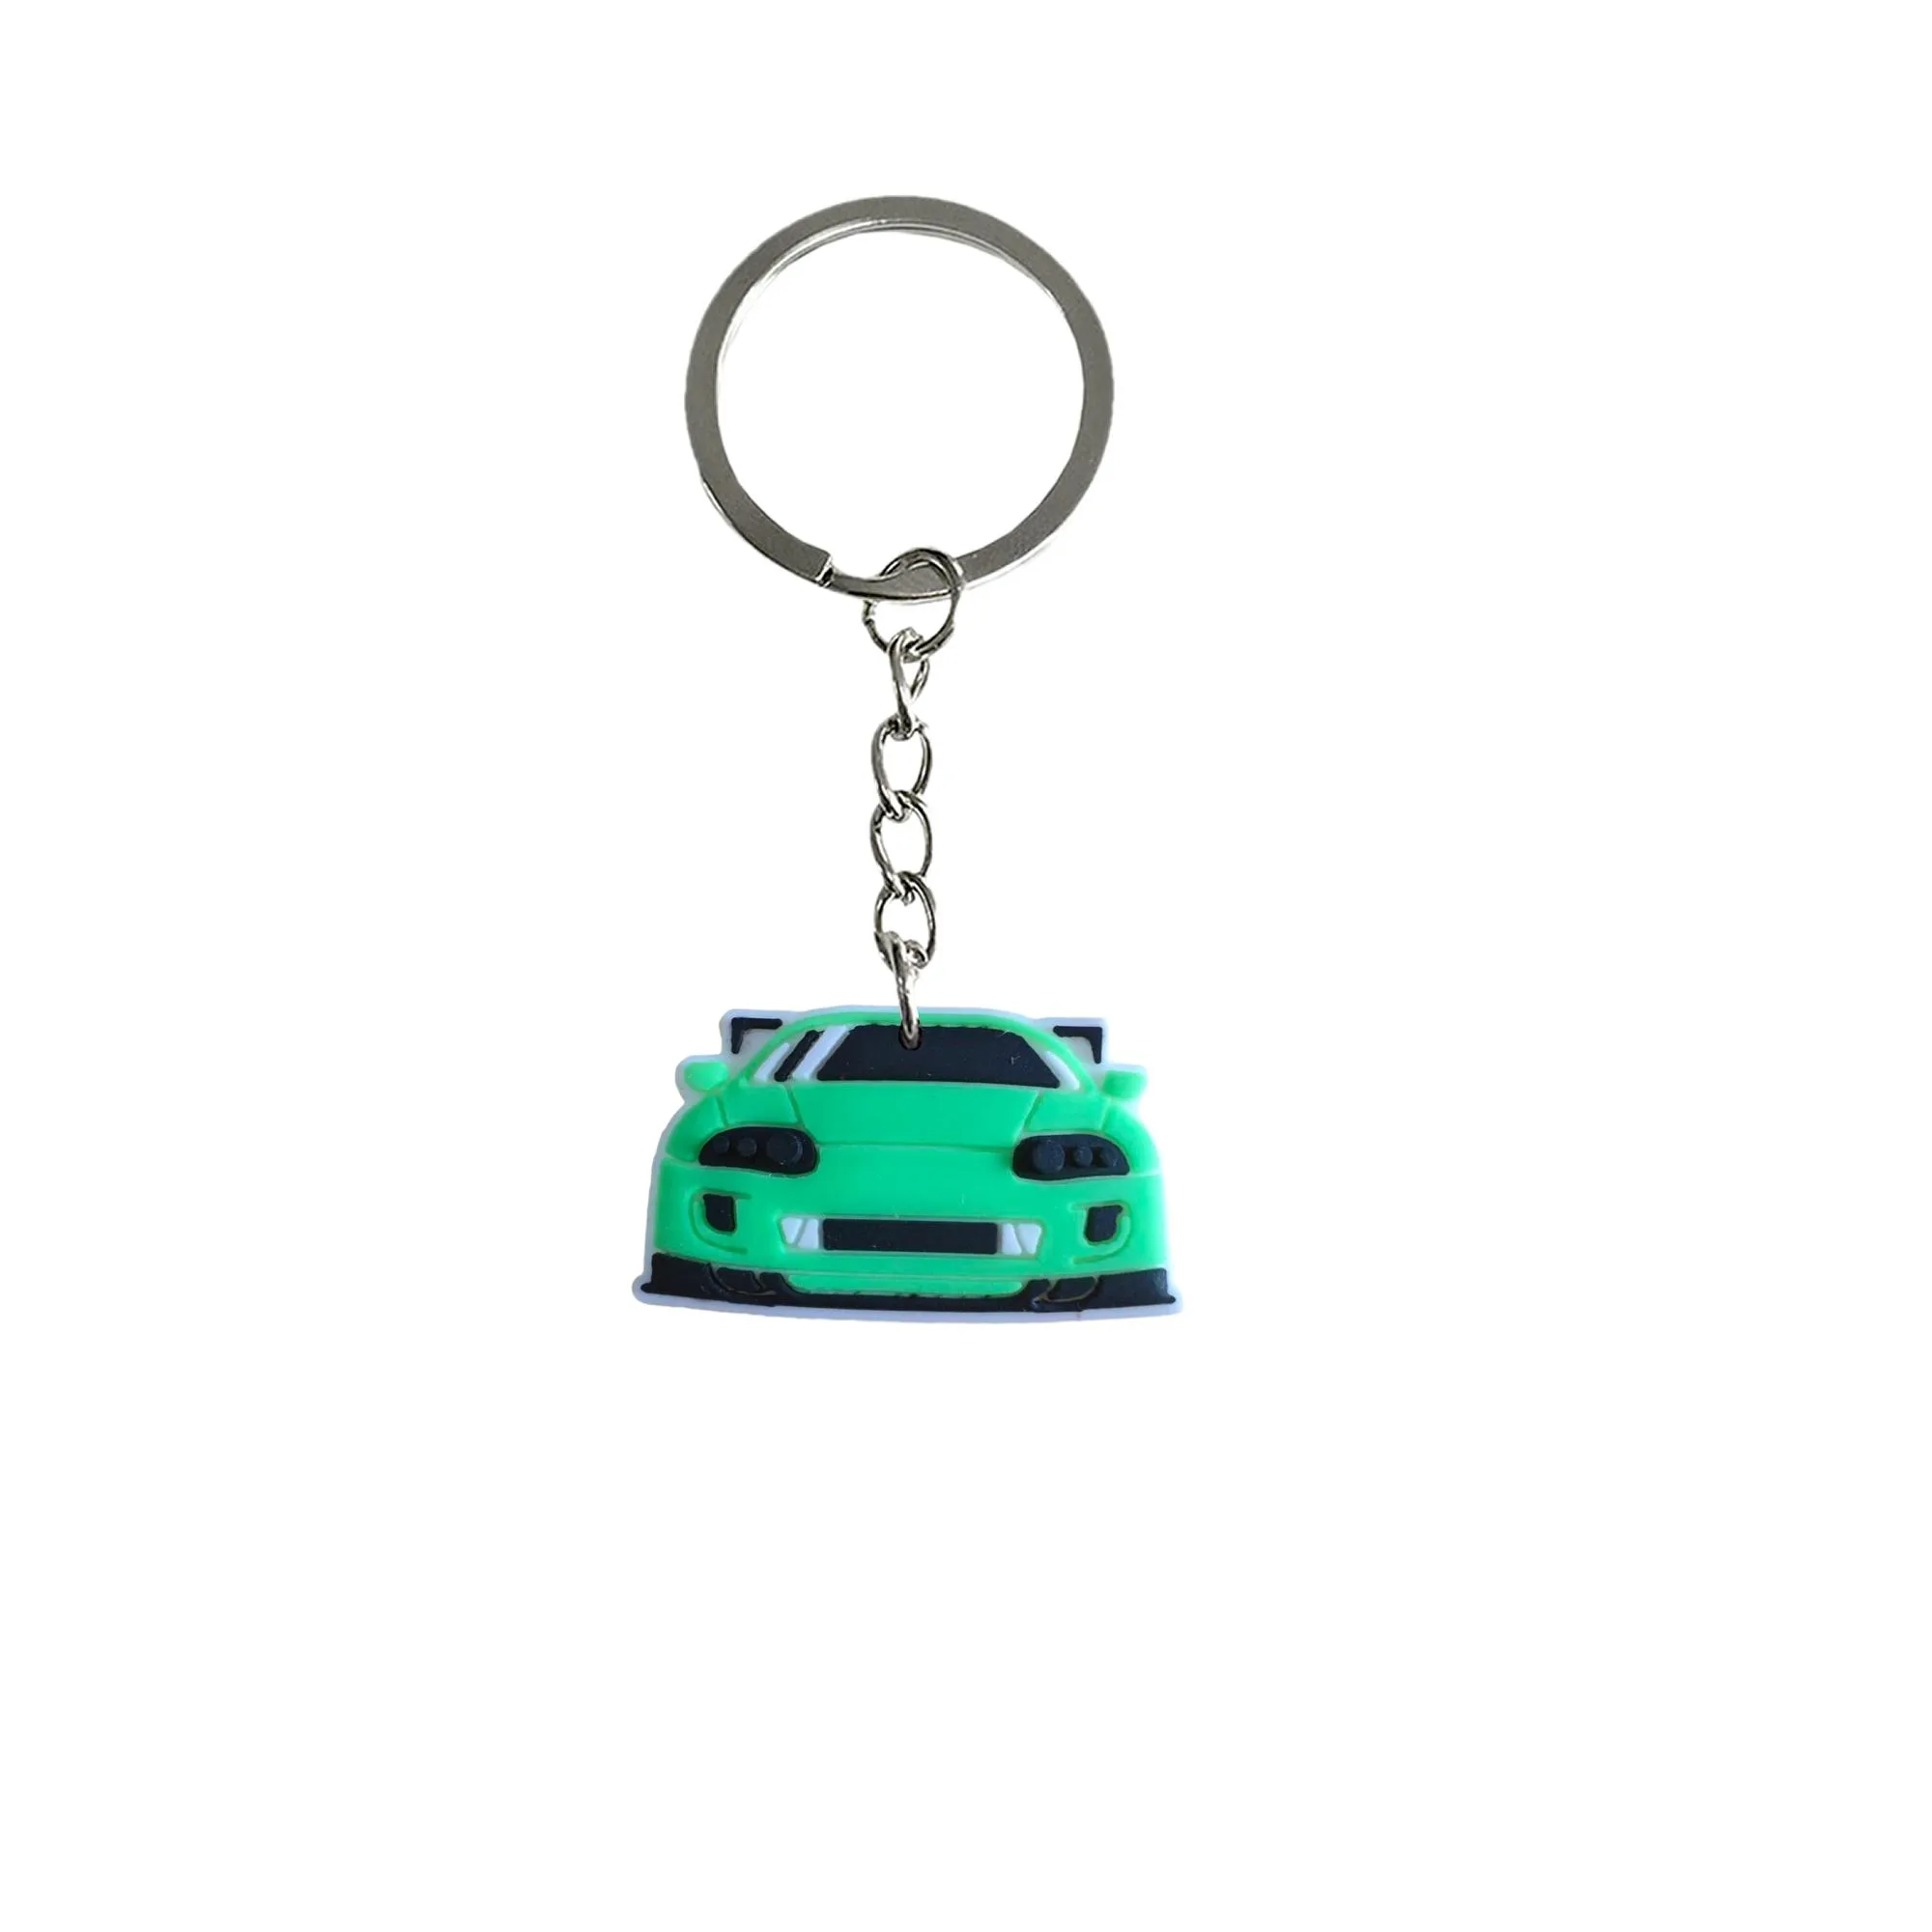 transportation 1 keychain keychains for backpack key chain kid boy girl party favors gift boys keyring suitable schoolbag anime cool backpacks school day birthday supplies men